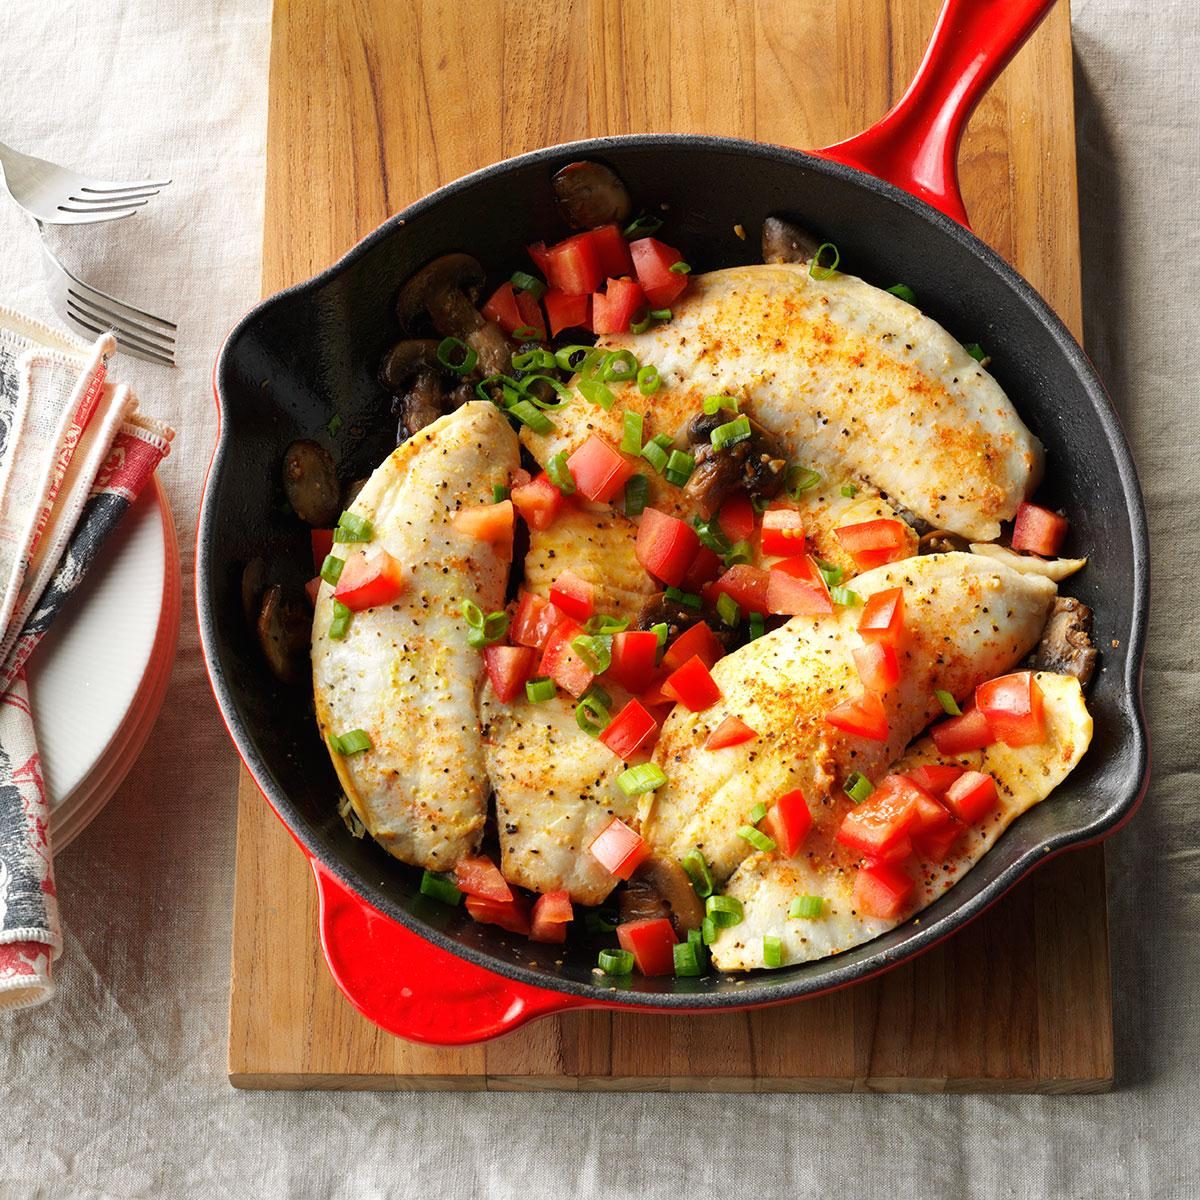 Cook the holiday meals in some cast iron skillets from $12 (Up to